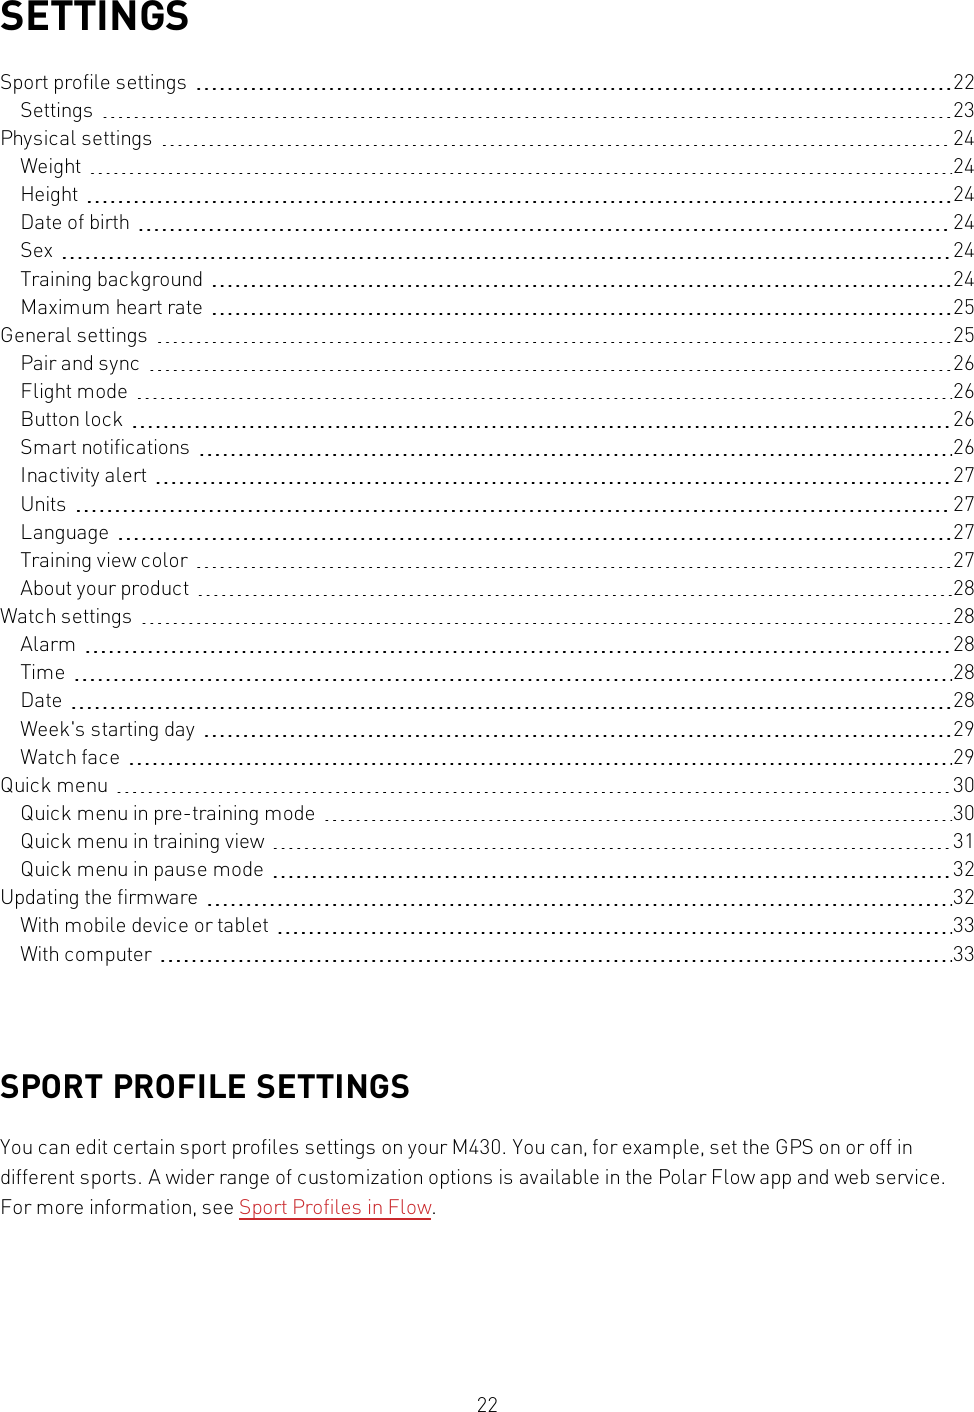 22SETTINGSSport profile settings 22Settings 23Physical settings 24Weight 24Height 24Date of birth 24Sex 24Training background 24Maximum heart rate 25General settings 25Pair and sync 26Flight mode 26Button lock 26Smart notifications 26Inactivity alert 27Units 27Language 27Training view color 27About your product 28Watch settings 28Alarm 28Time 28Date 28Week&apos;s starting day 29Watch face 29Quick menu 30Quick menu in pre-training mode 30Quick menu in training view 31Quick menu in pause mode 32Updating the firmware 32With mobile device or tablet 33With computer 33SPORT PROFILE SETTINGSYou can edit certain sport profiles settings on your M430. You can, for example, set the GPSon or off indifferent sports. A wider range of customization options is available in the Polar Flow app and web service.For more information, see Sport Profiles in Flow.